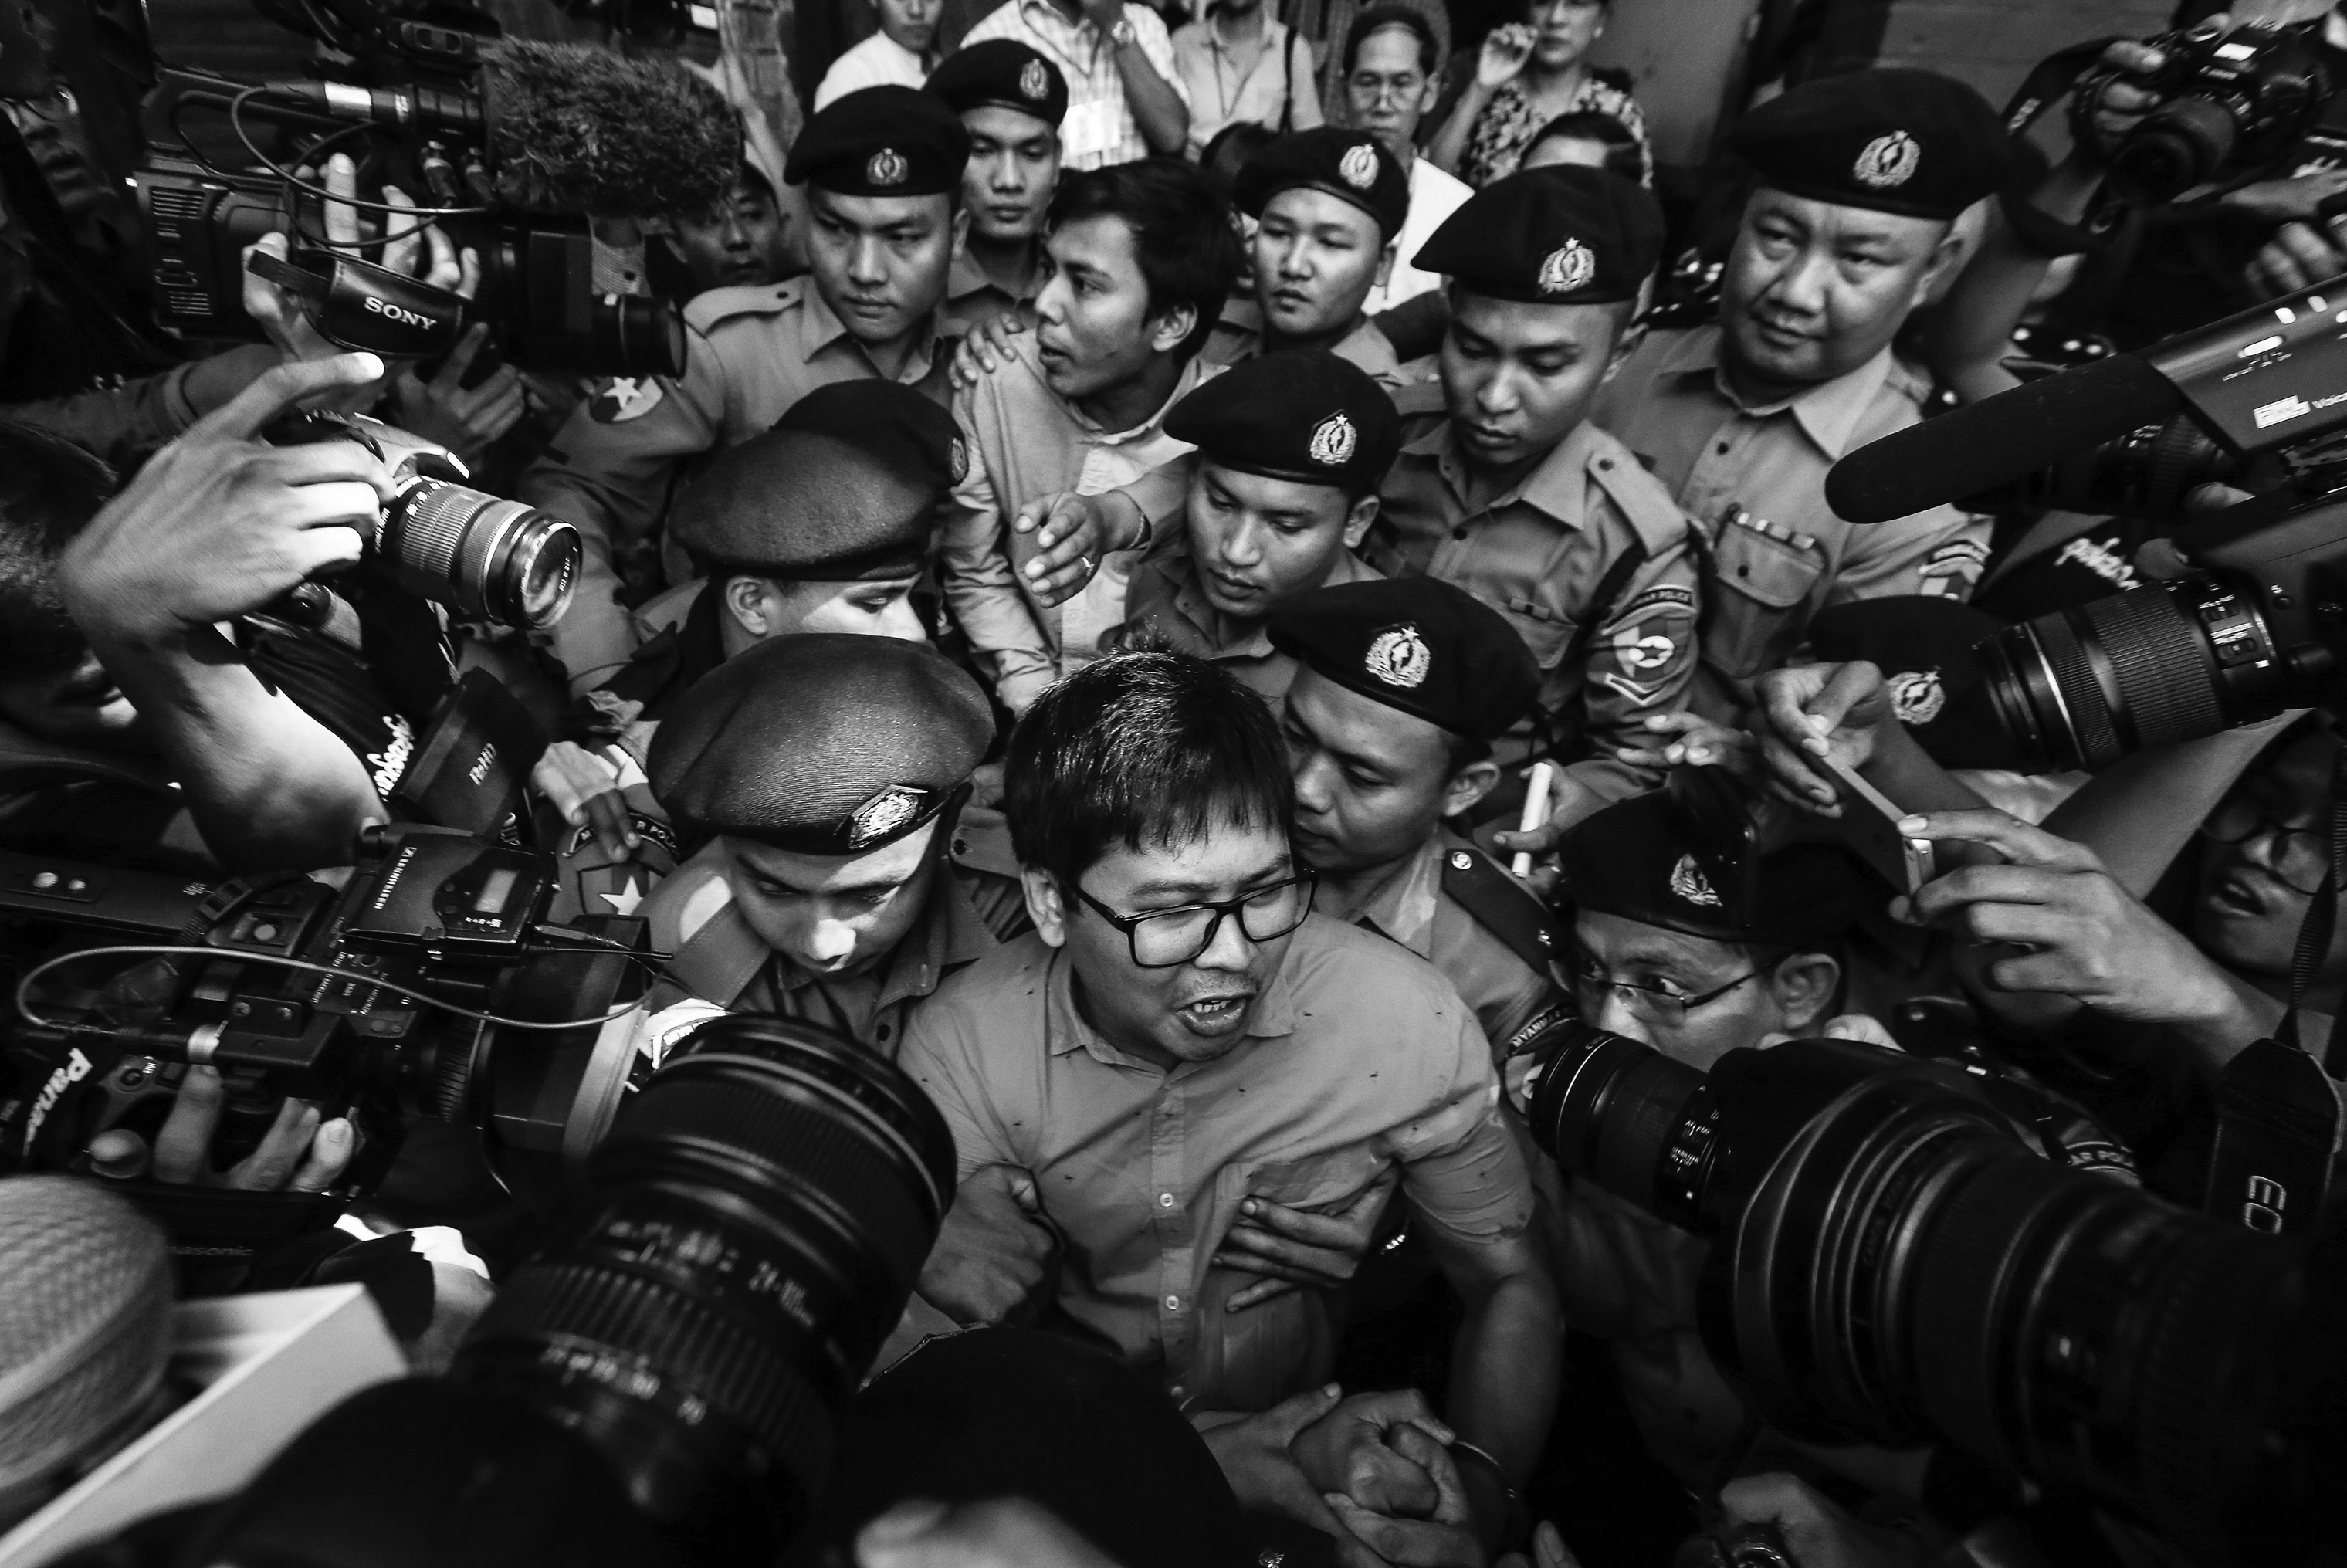 Reuters' journalists Wa Lone (C, front) and Kyaw Soe Oo (C, back) are escorted by police as they leave the court after their first trial in Yangon, Myanmar, 10 January 2018. Reuters journalists Wa Lone and Kyaw Soe Oo were arrested on the outskirts of Yangon city on 12 December 2017 by Myanmar police for allegedly possessing classified police documents. In September the journalists were convicted to seven years in prison. (Lynn Bo Bo—EPA-EFE/Shutterstock)